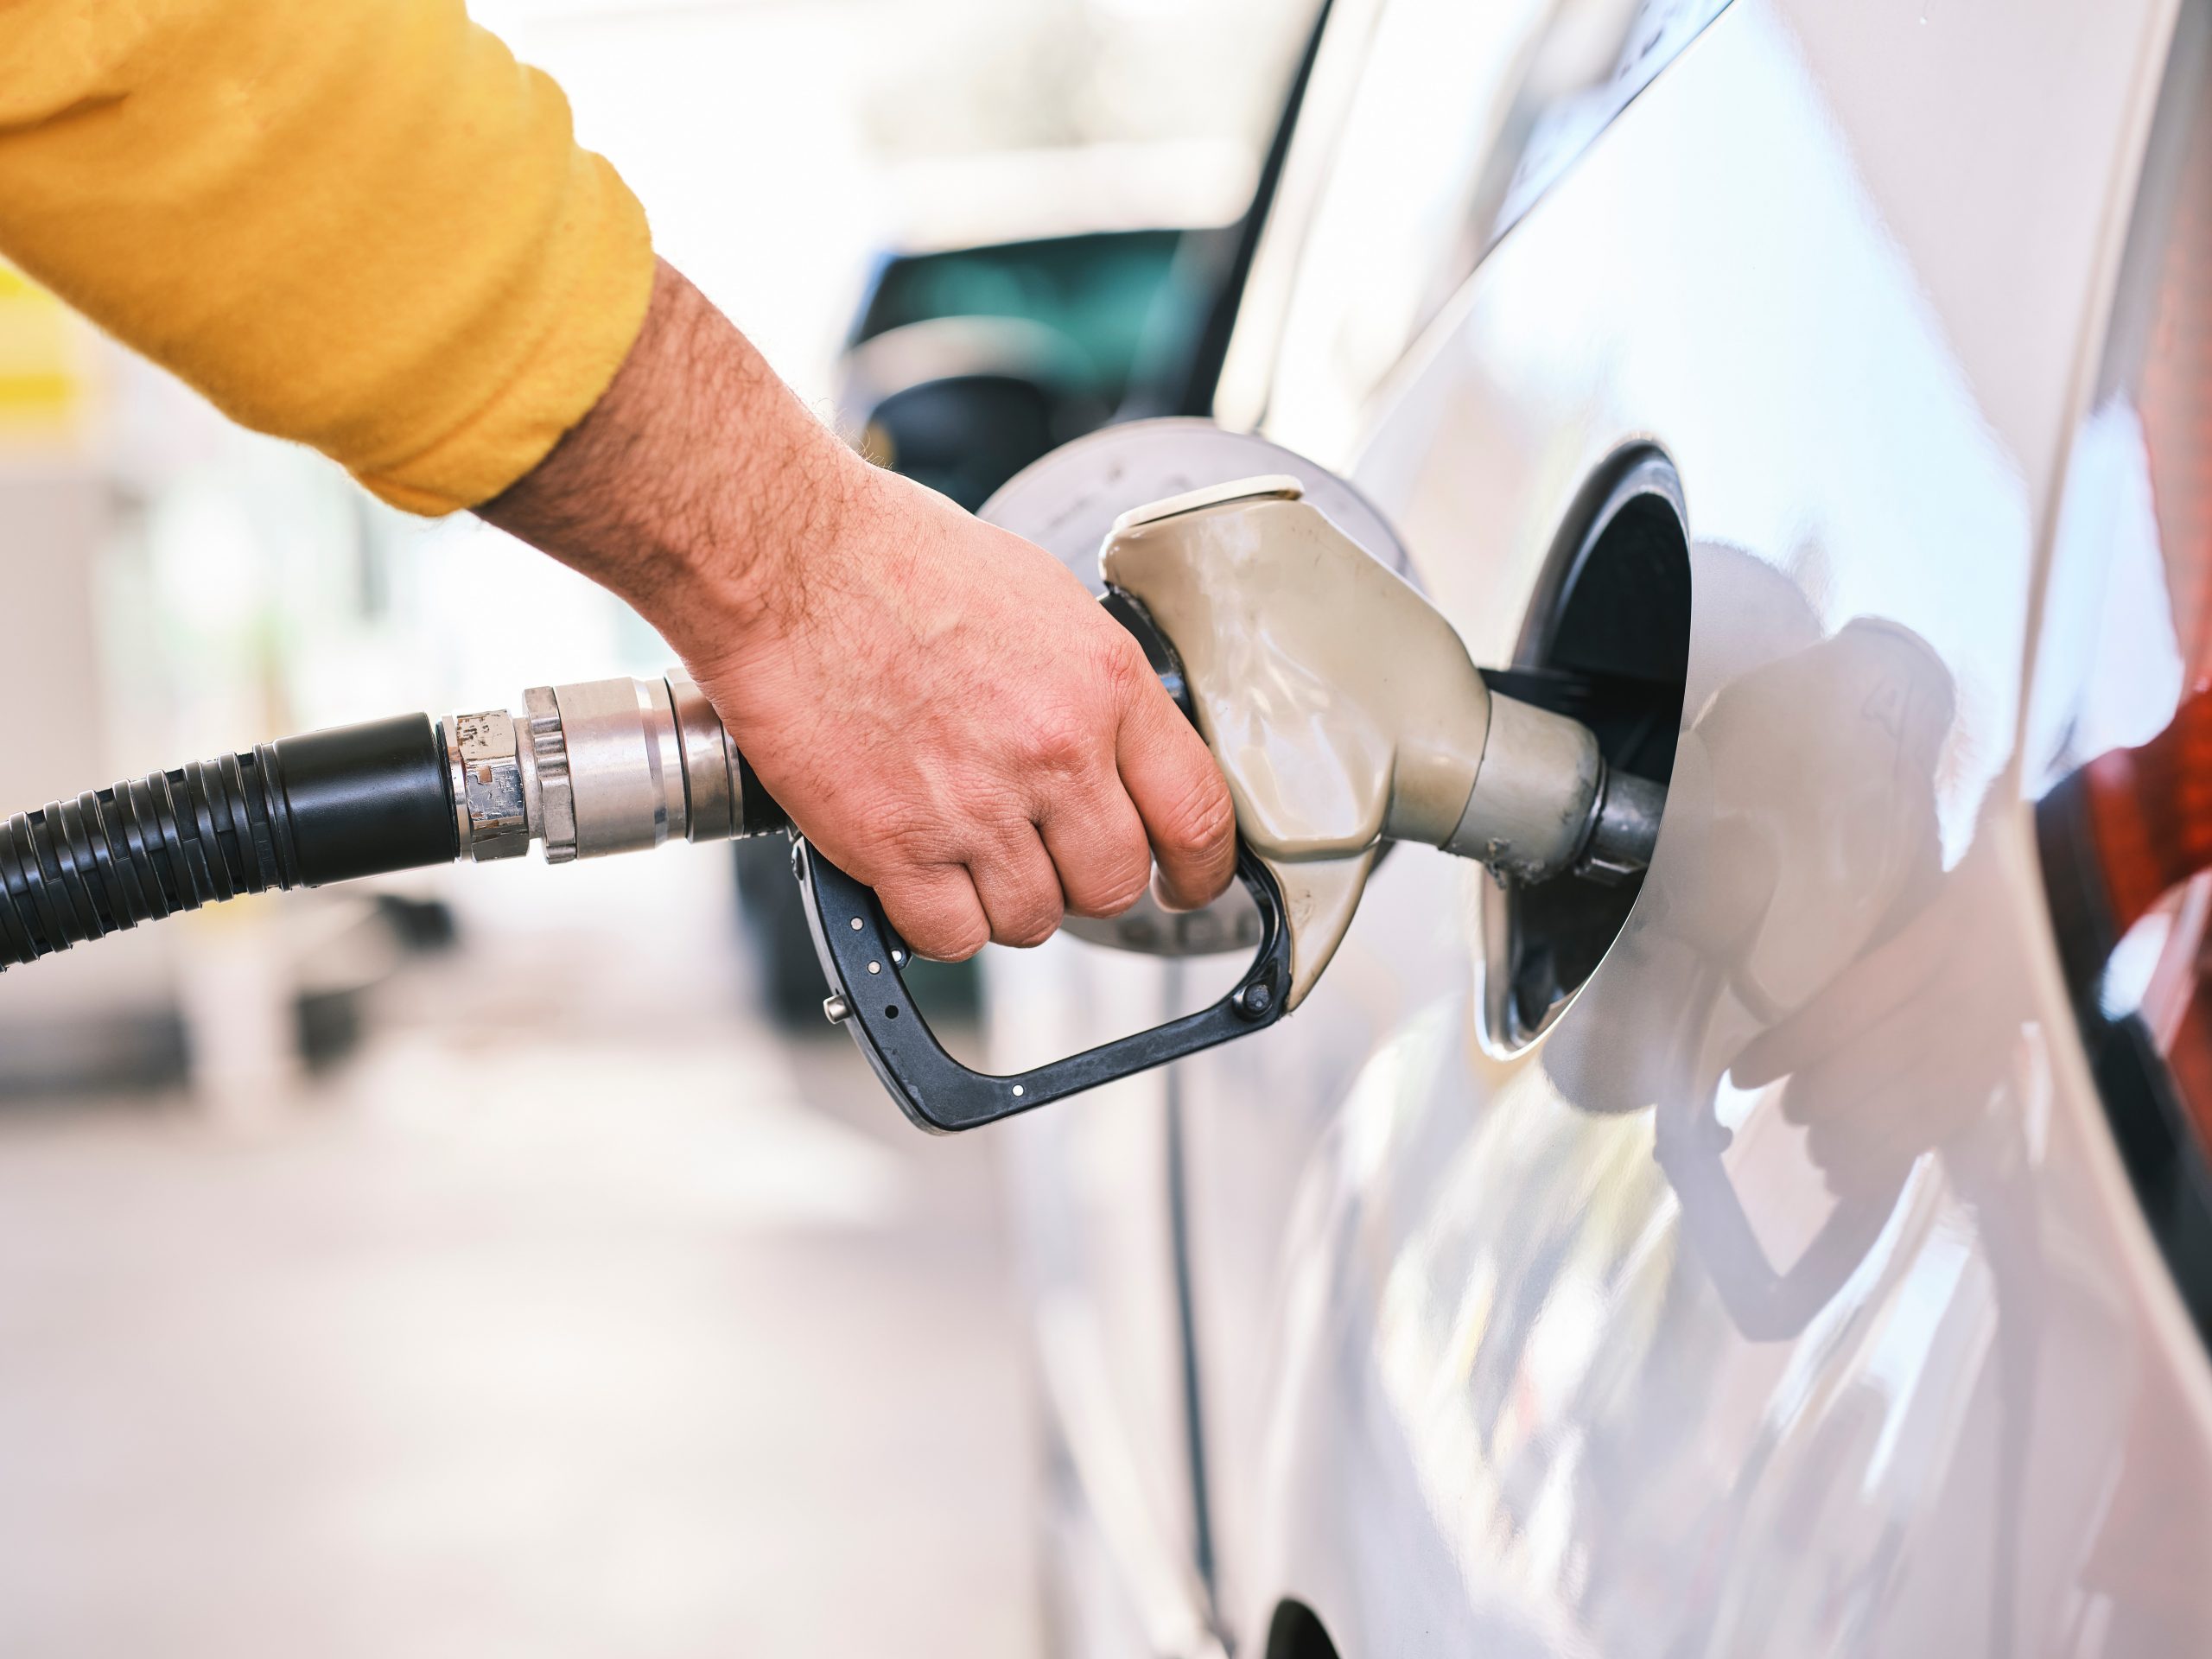 Federal Budget Fuel Excise Reduction: Will All Businesses Benefit?